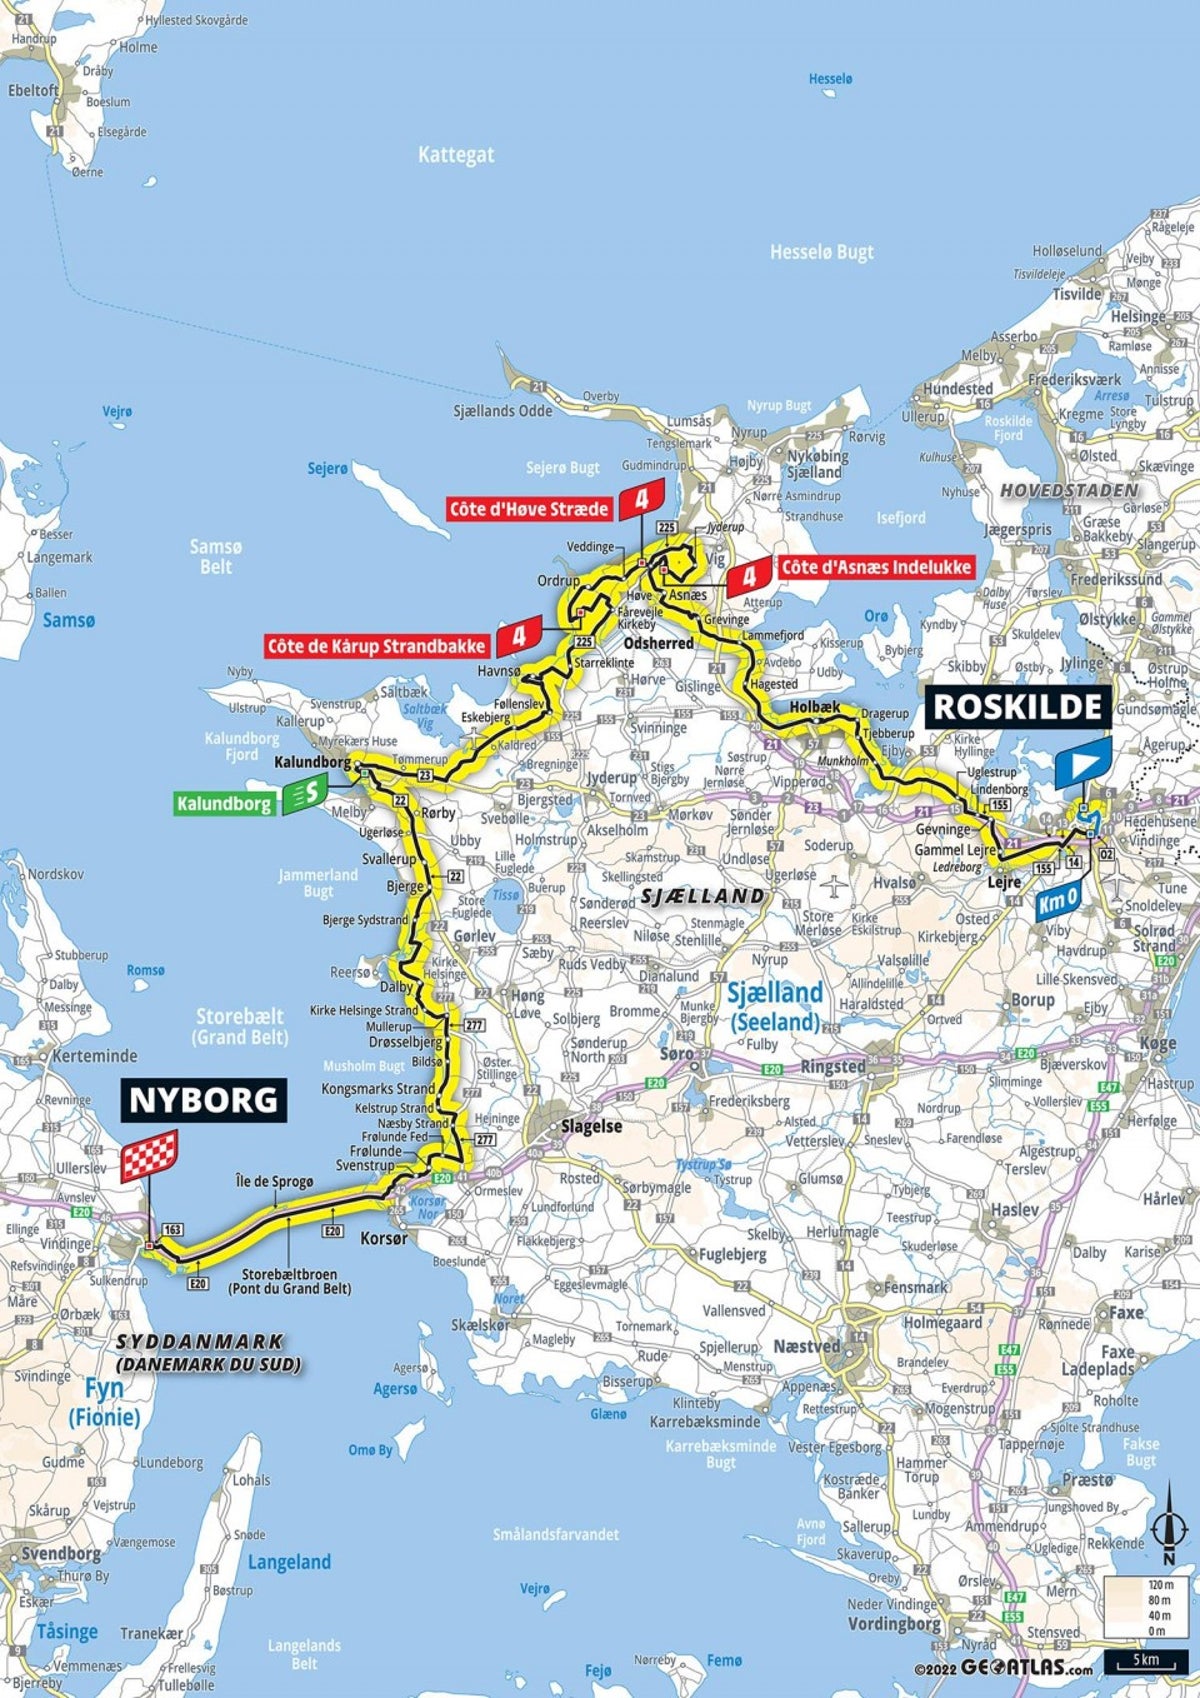 Tour de France 2022 Stage 2 preview: Route map and profile